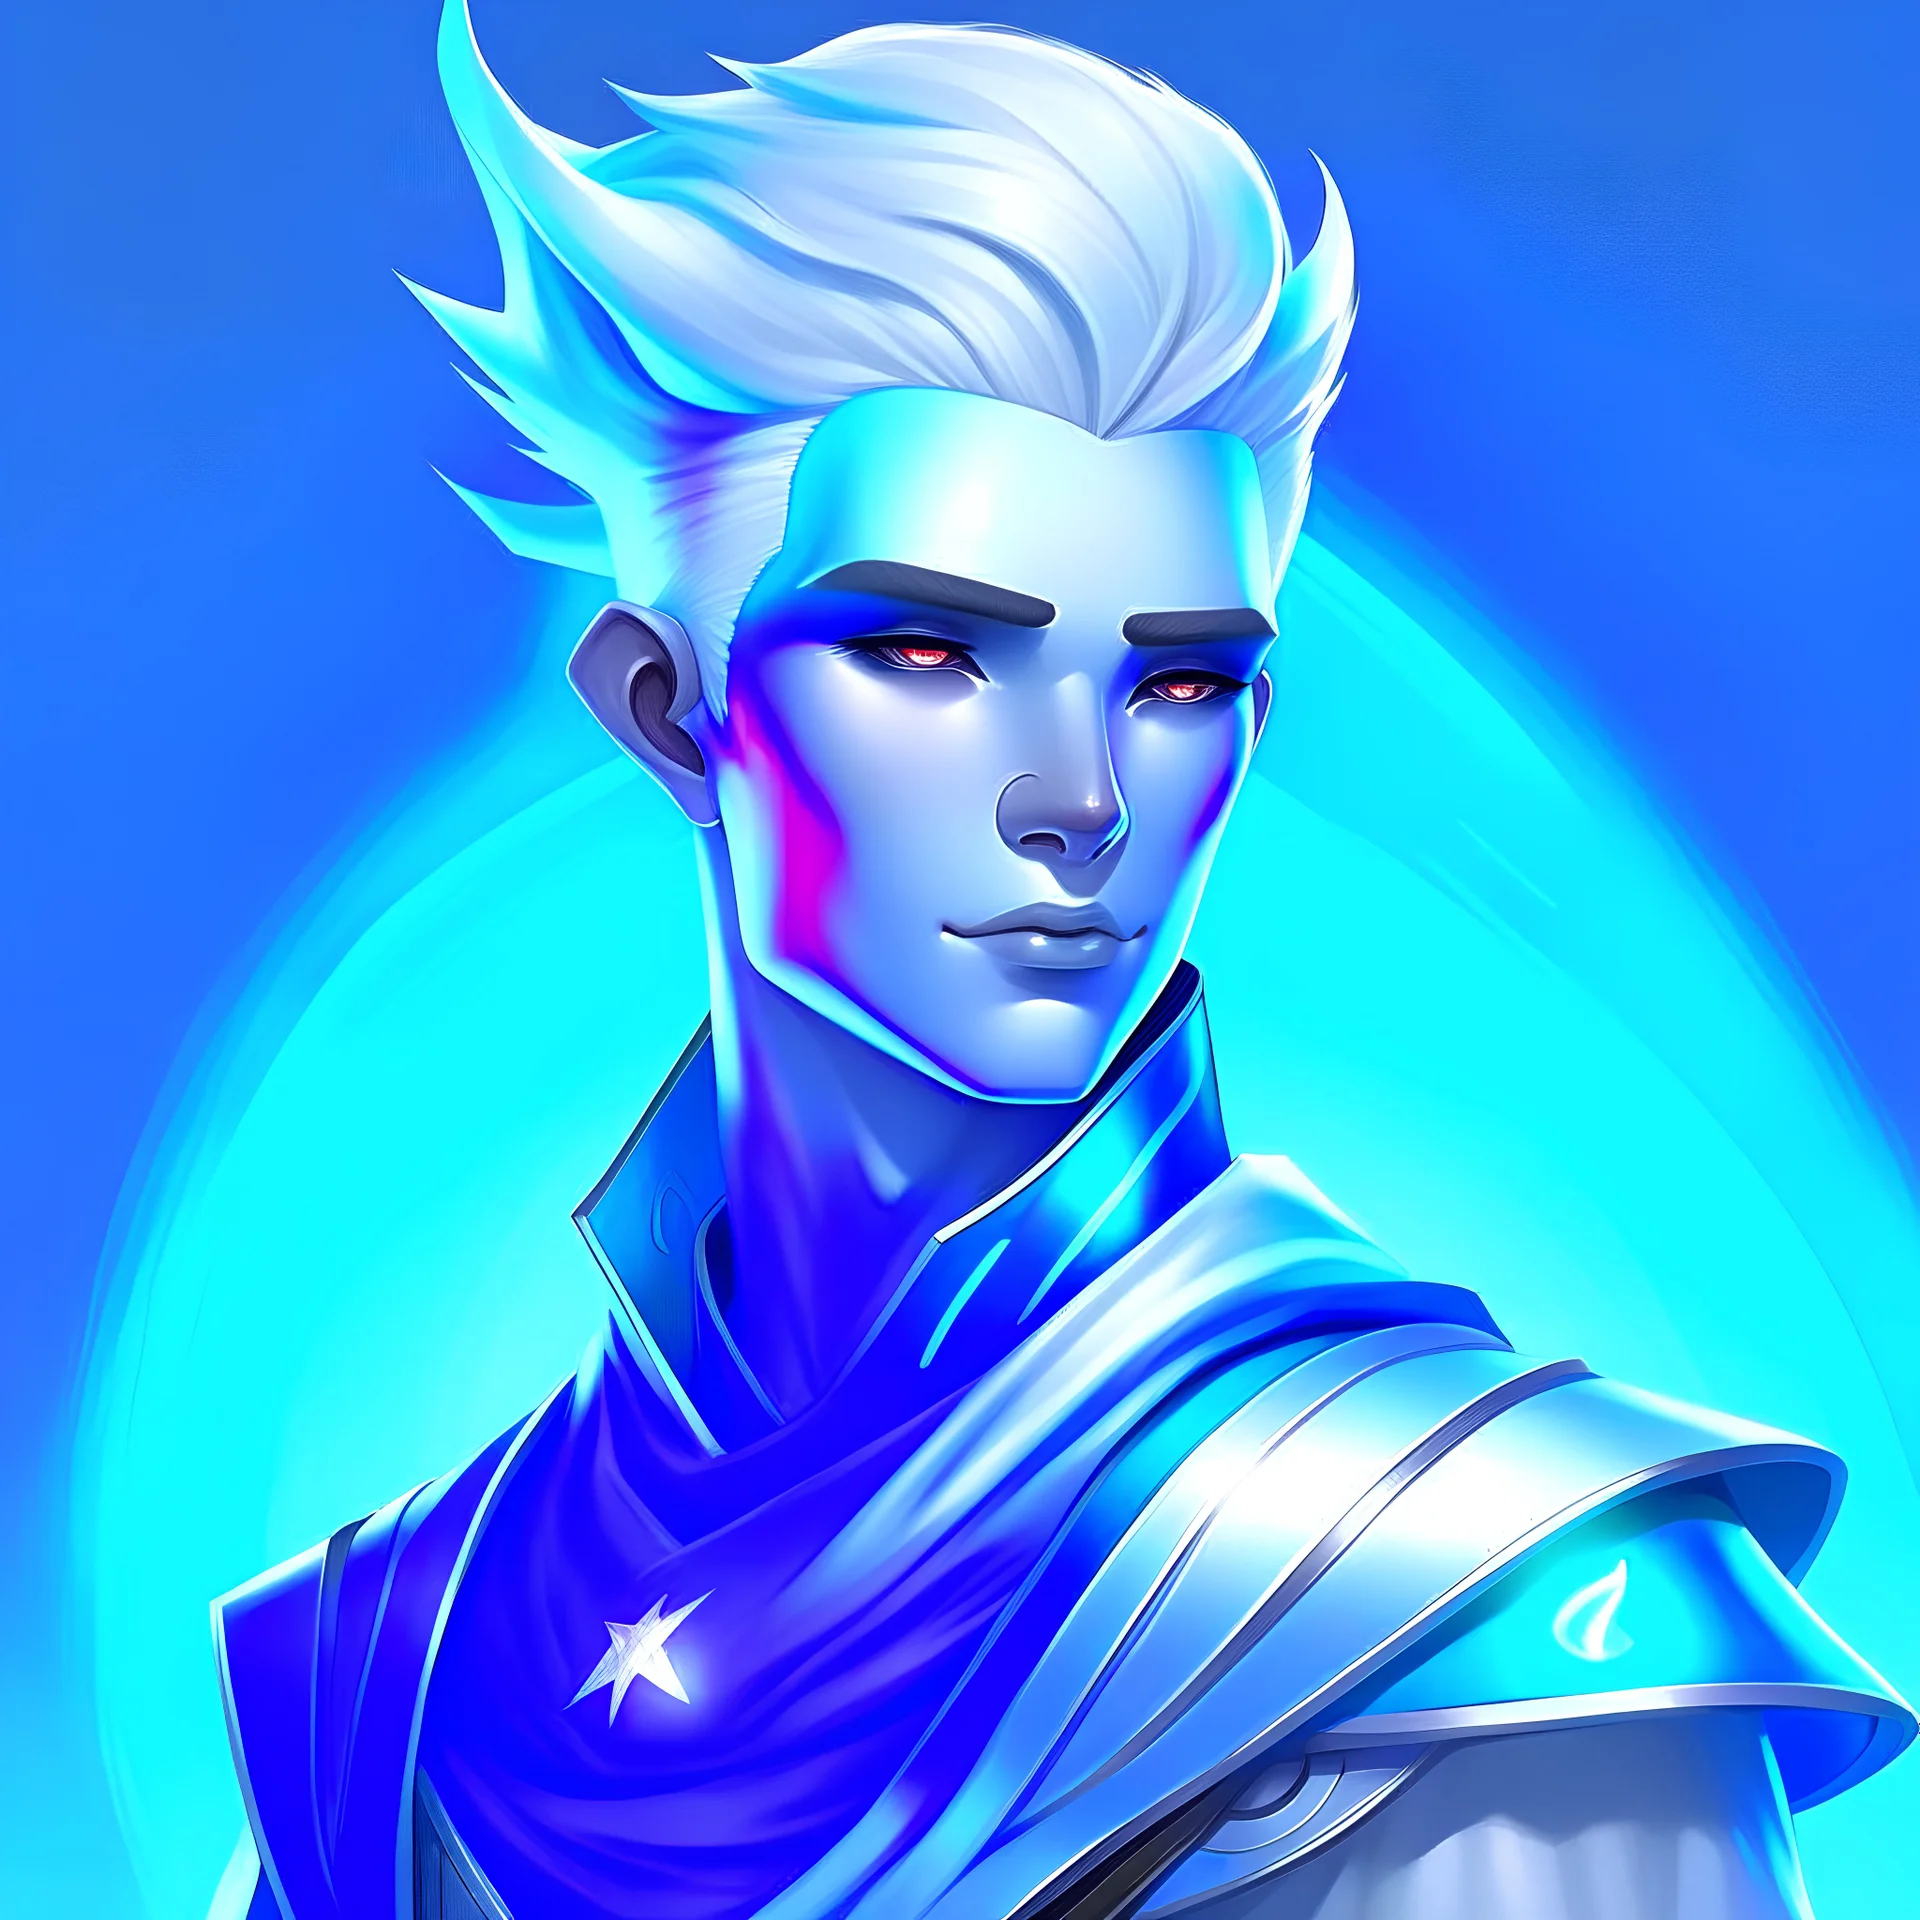 create a male young adult blue air genasi from dungeons and dragons, light blue skin, white short hair with skay blue highlights, sapphire eyes, wind like hair, wearing vestments, , digital art, high resolution, strong lighting